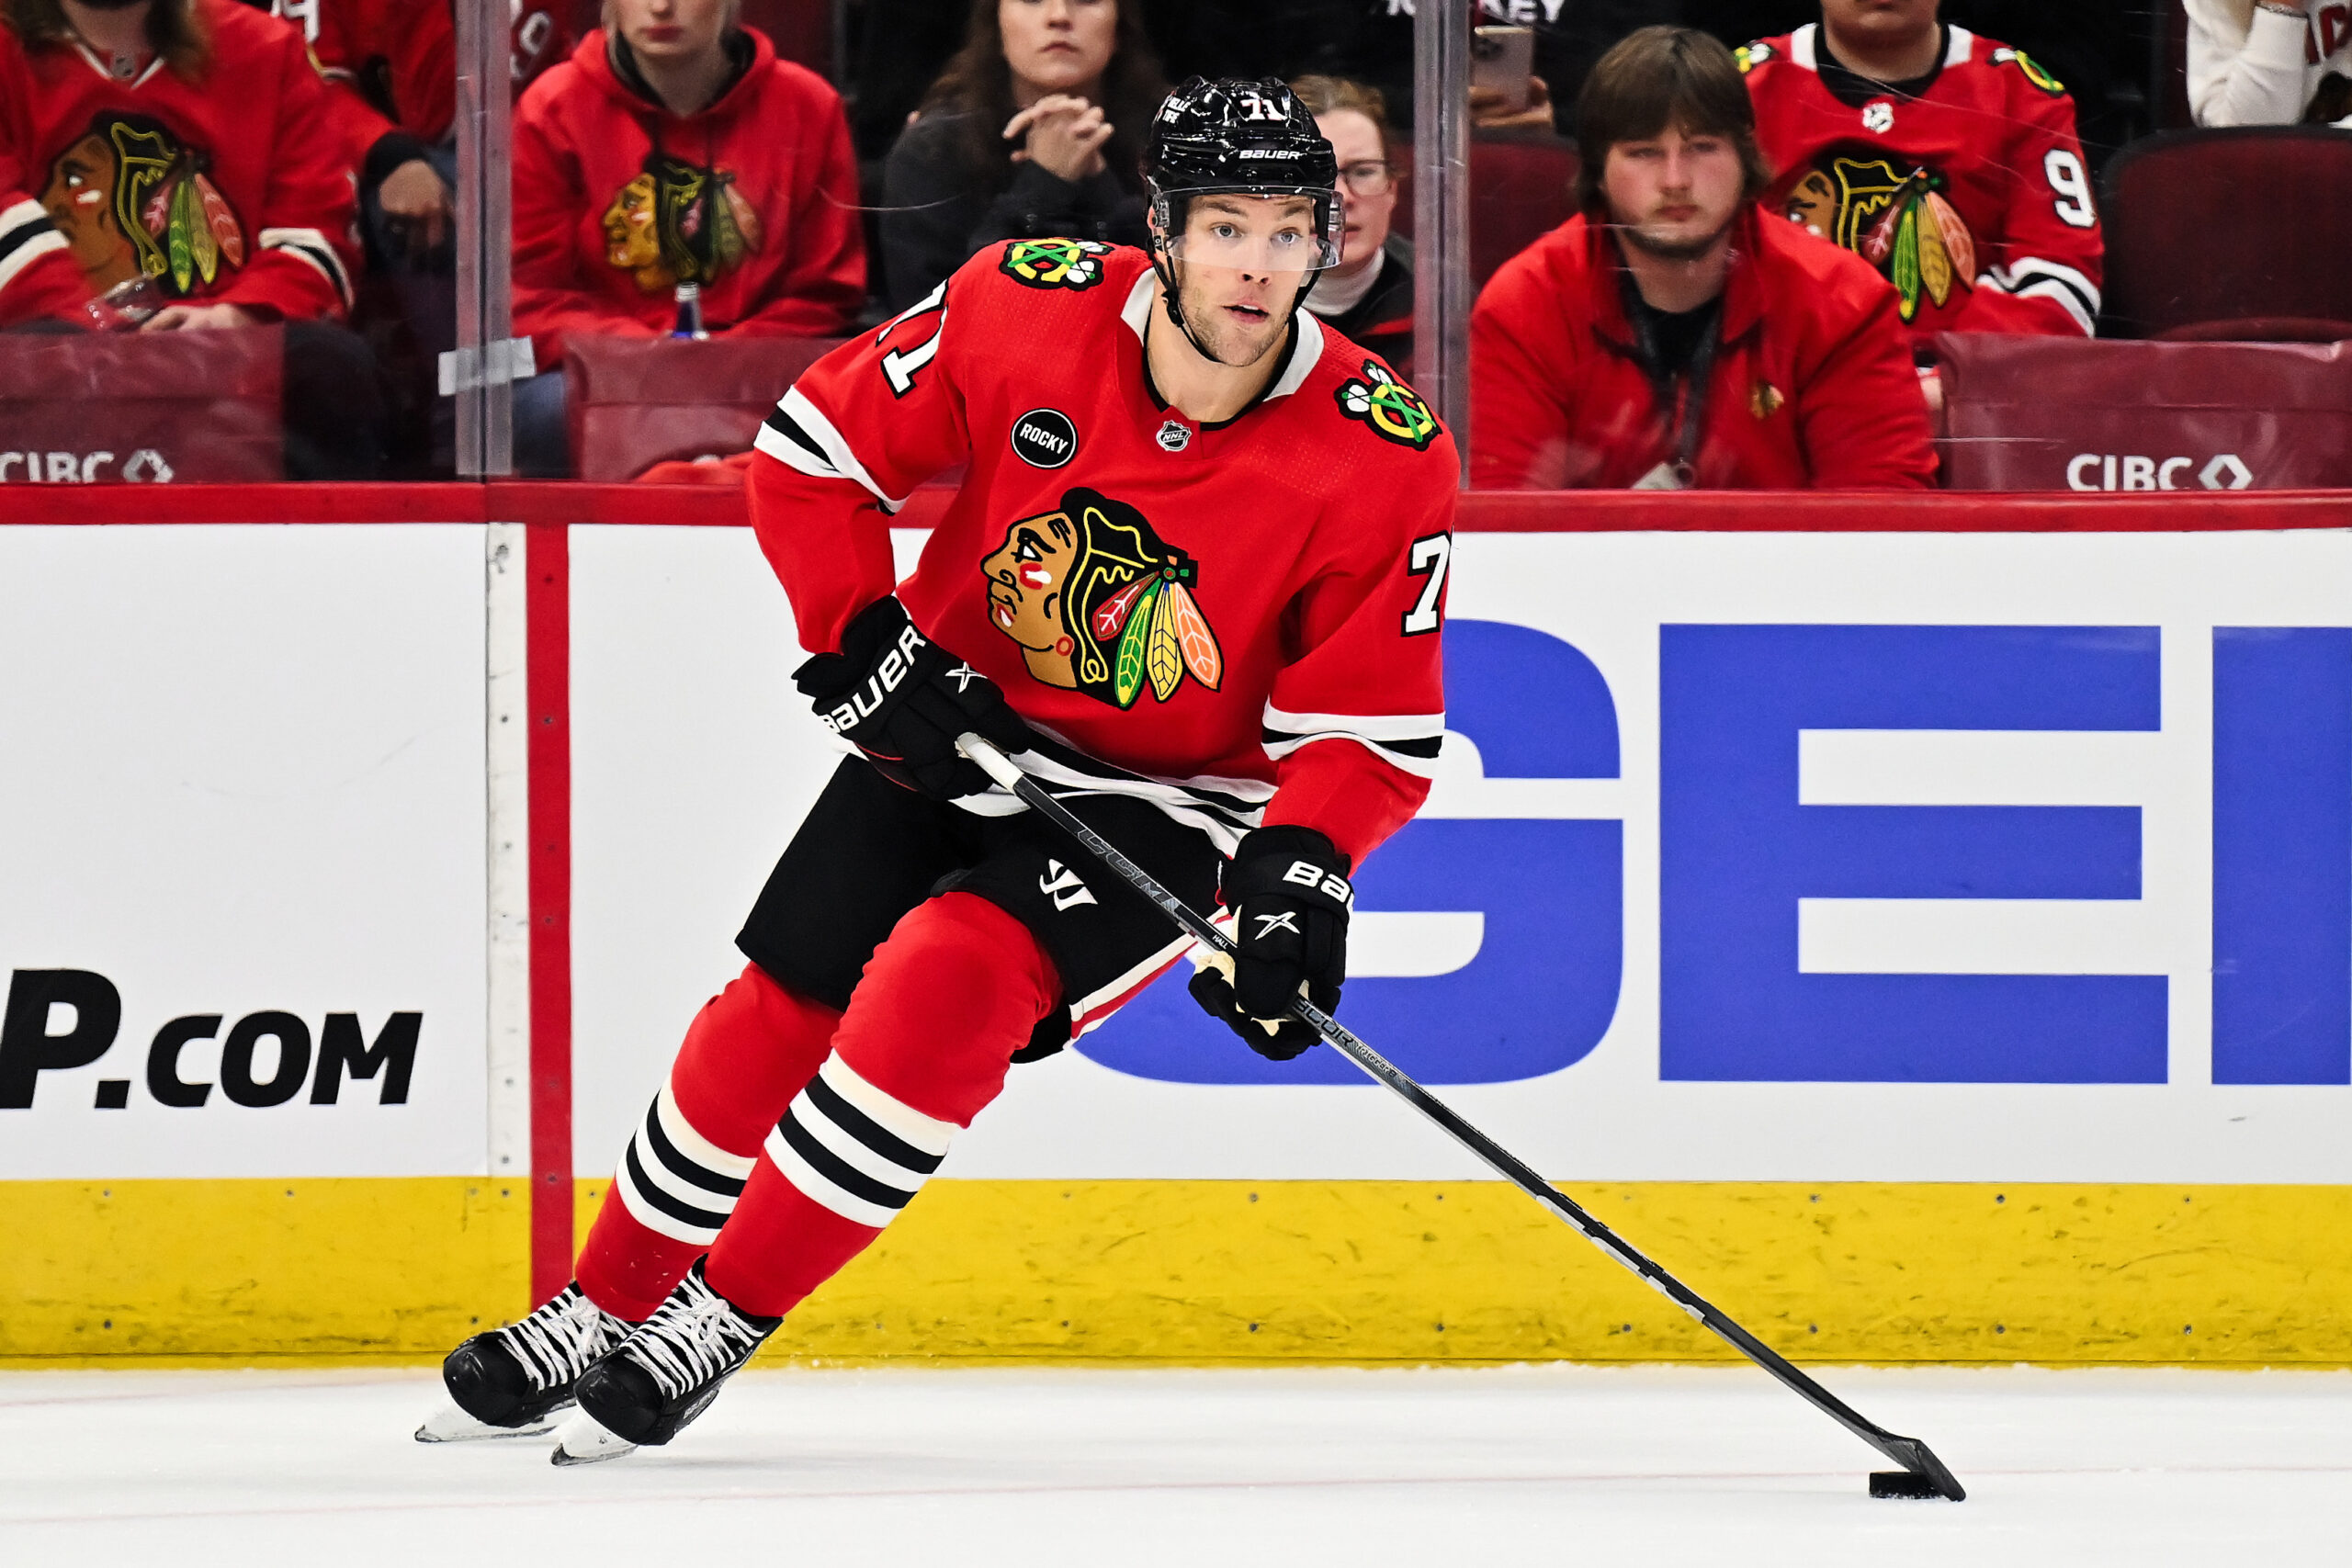 Blackhawks' Taylor Hall injured, ruled week-to-week after hit by